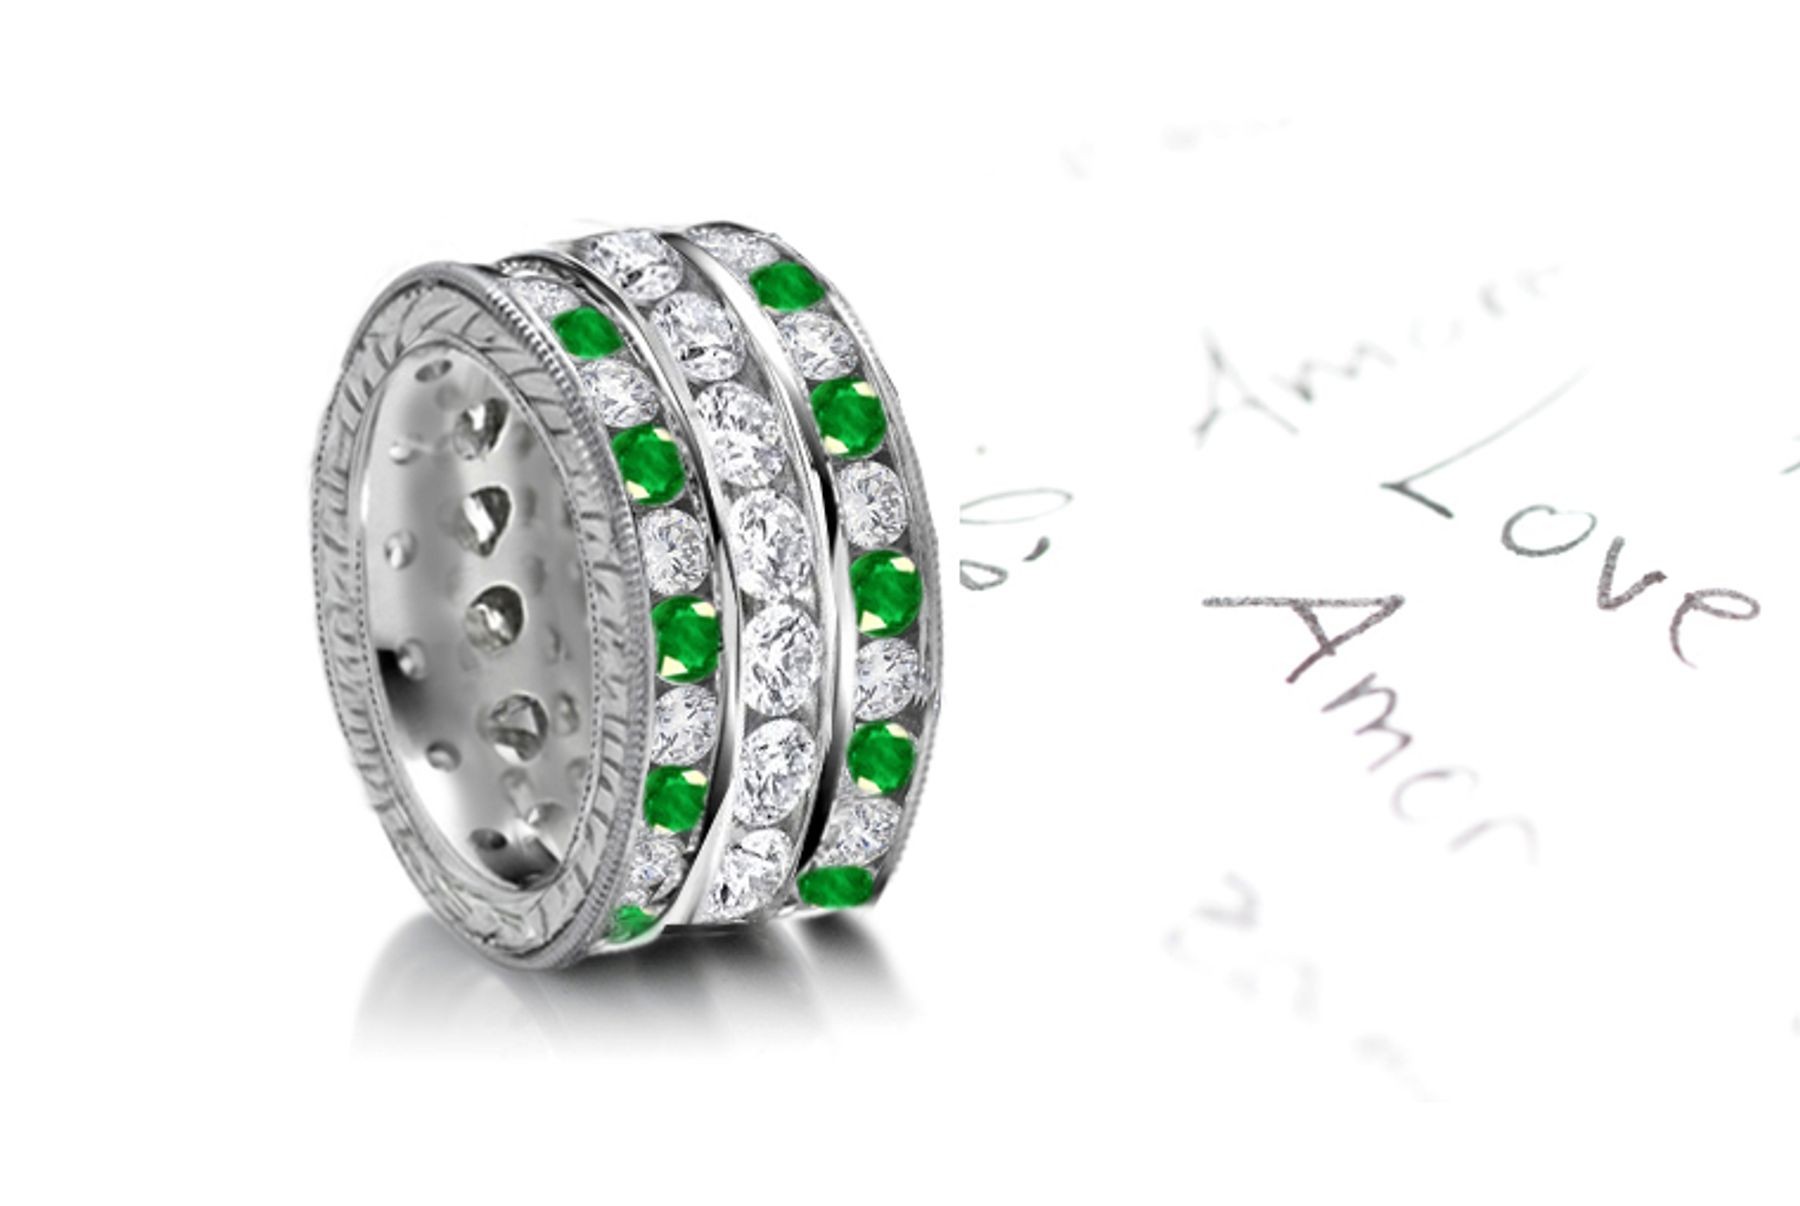 History of Jewels: Cocktail Emerald & Brilliant Diamond Wedding Band in Gold mounting